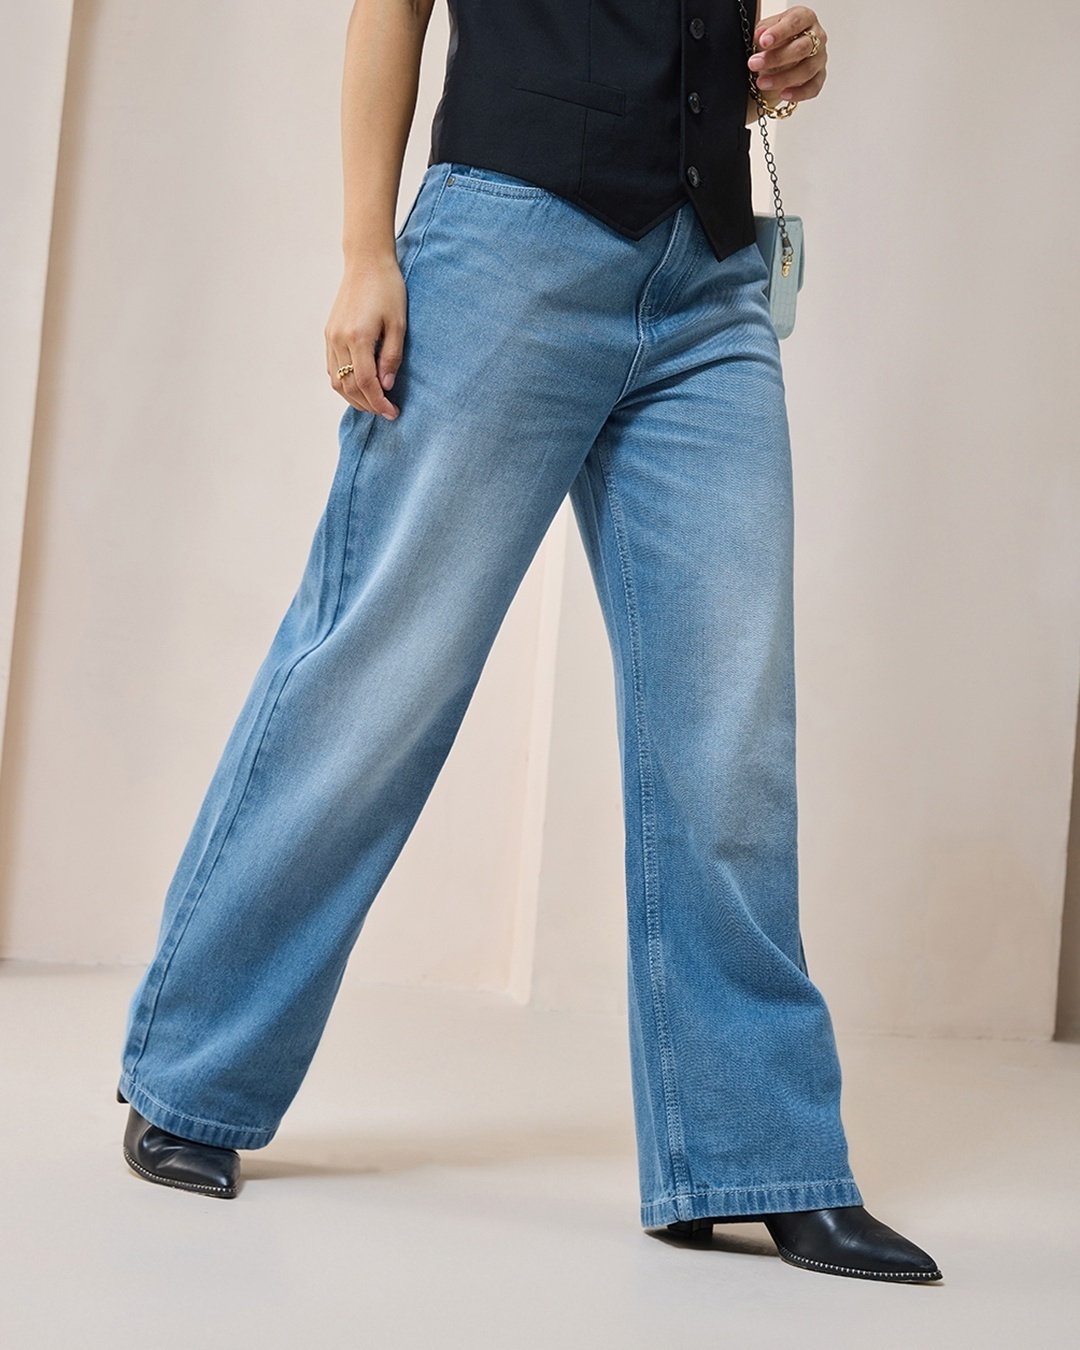 model wearing jeans with Round Neck T-shirt